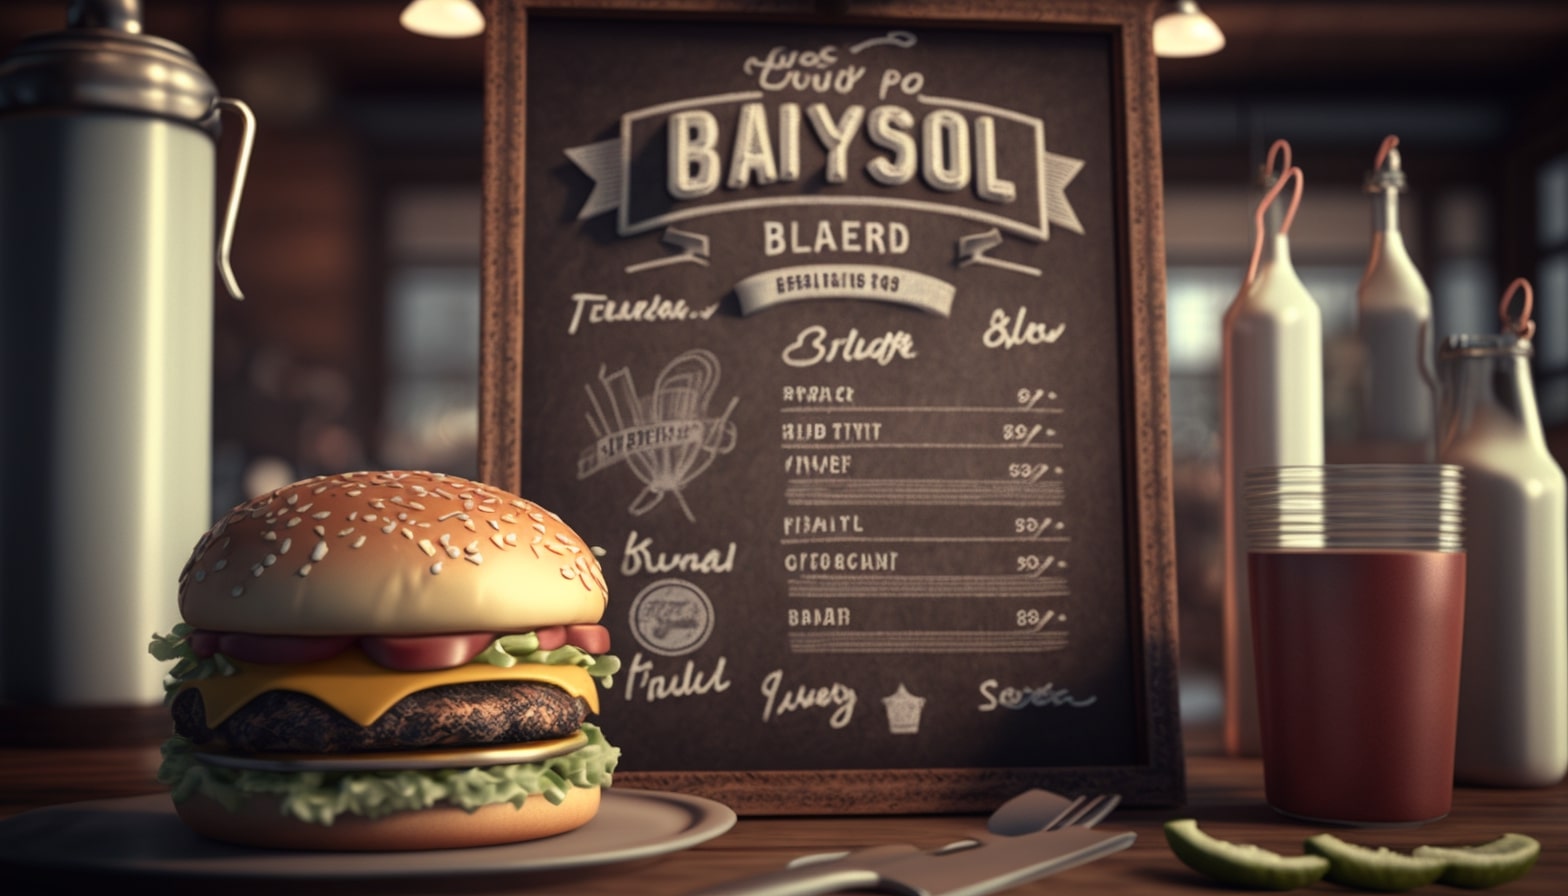 Fatboy's Menu with Prices